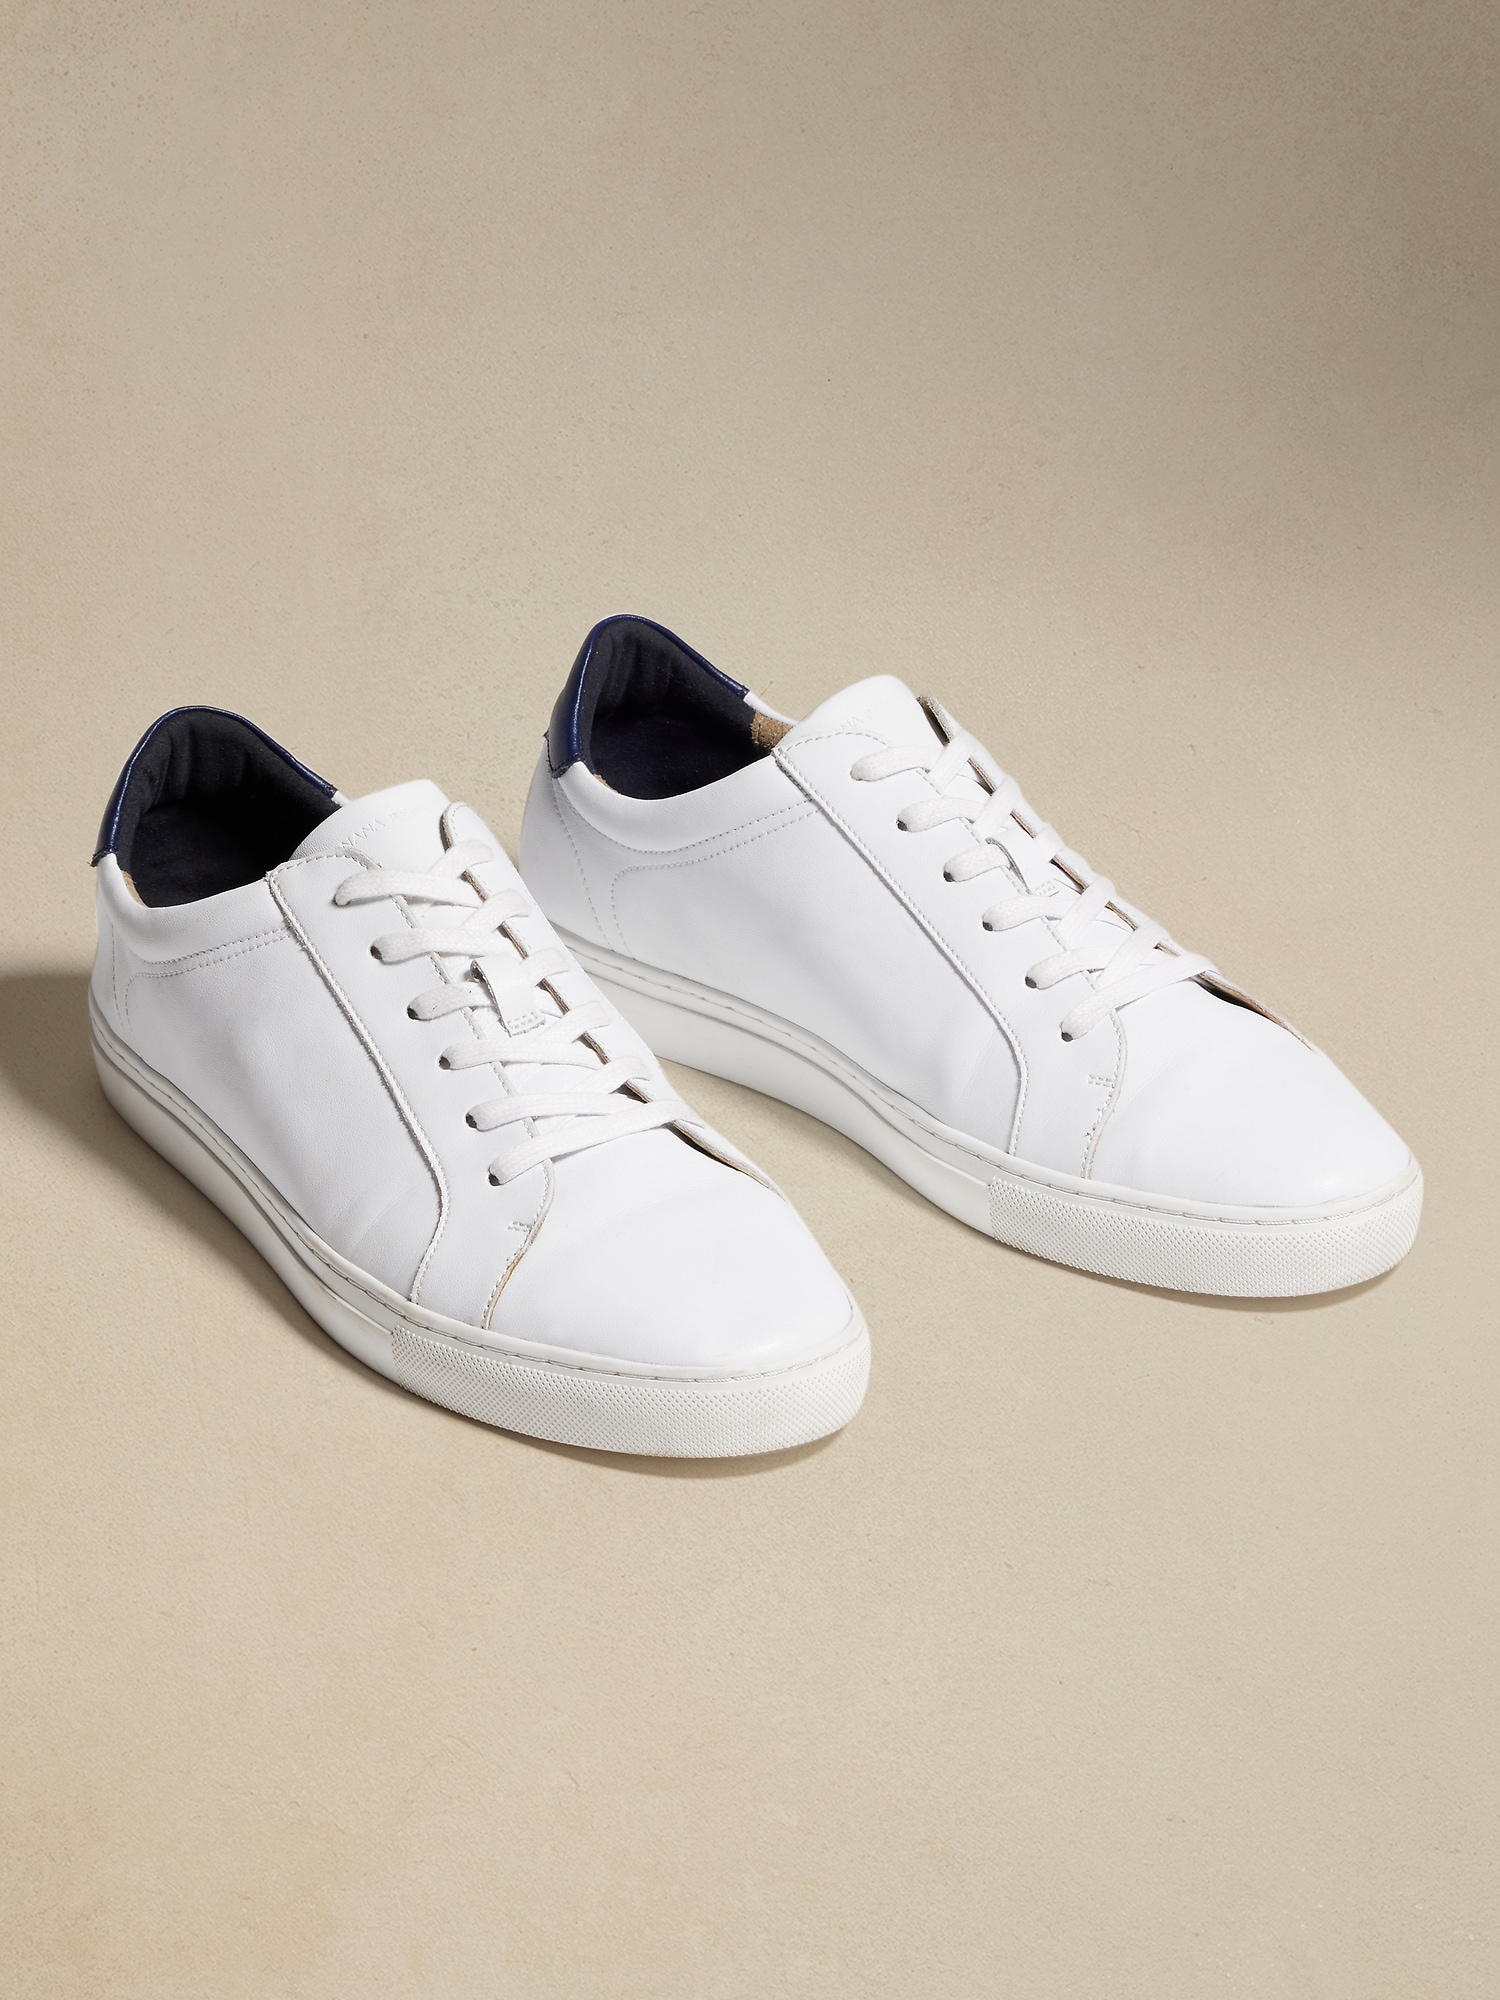 Banana Republic Perforated white leather sneakers Women, Women's Fashion,  Footwear, Sneakers on Carousell